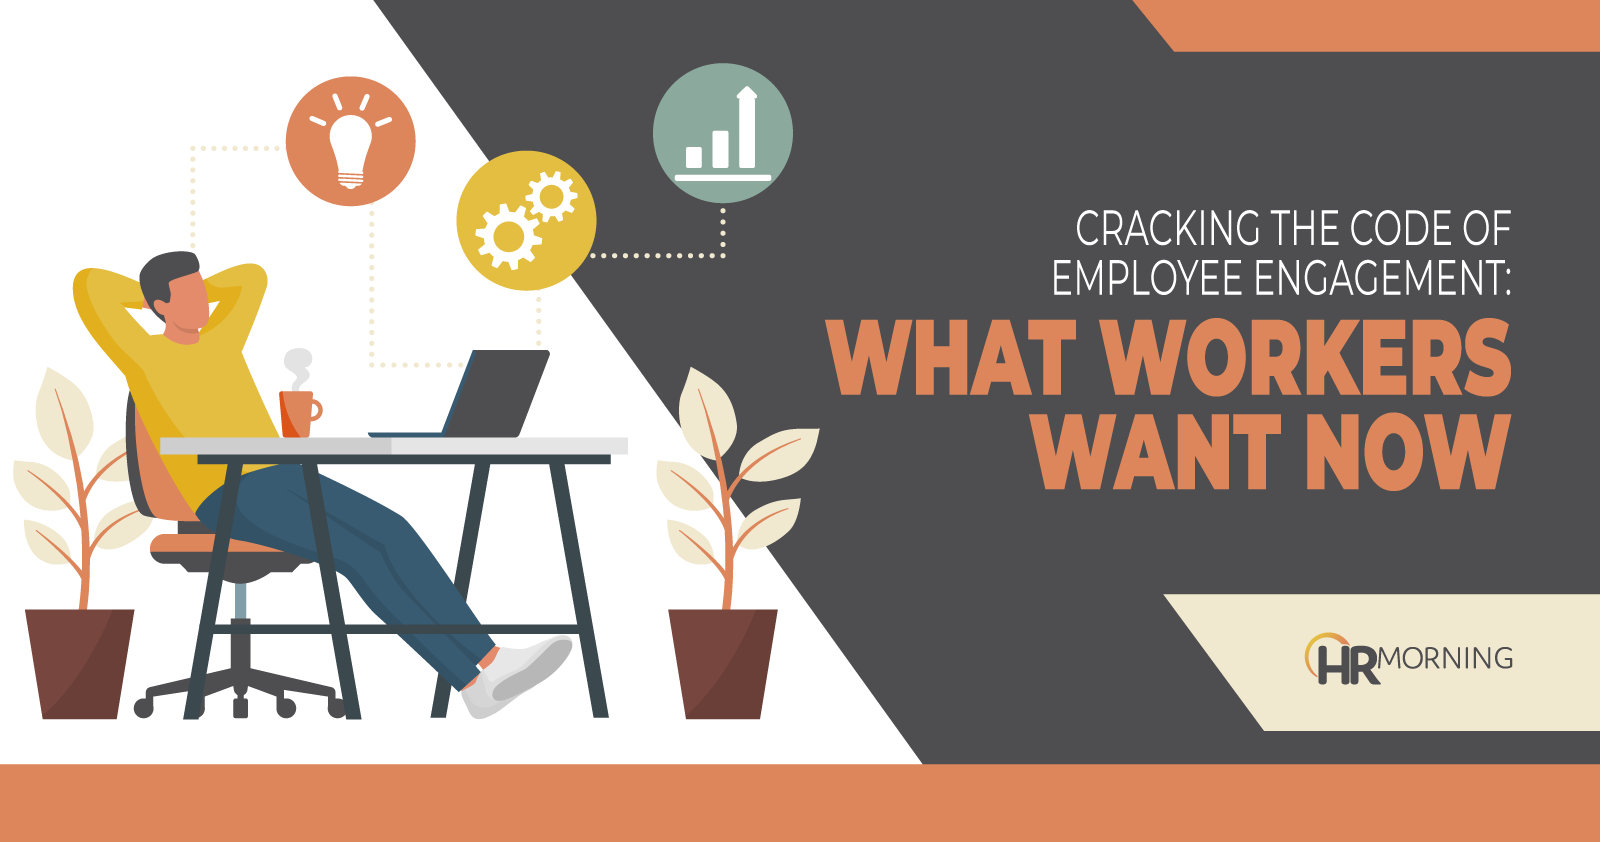 Cracking the code of employee engagement: What workers want now